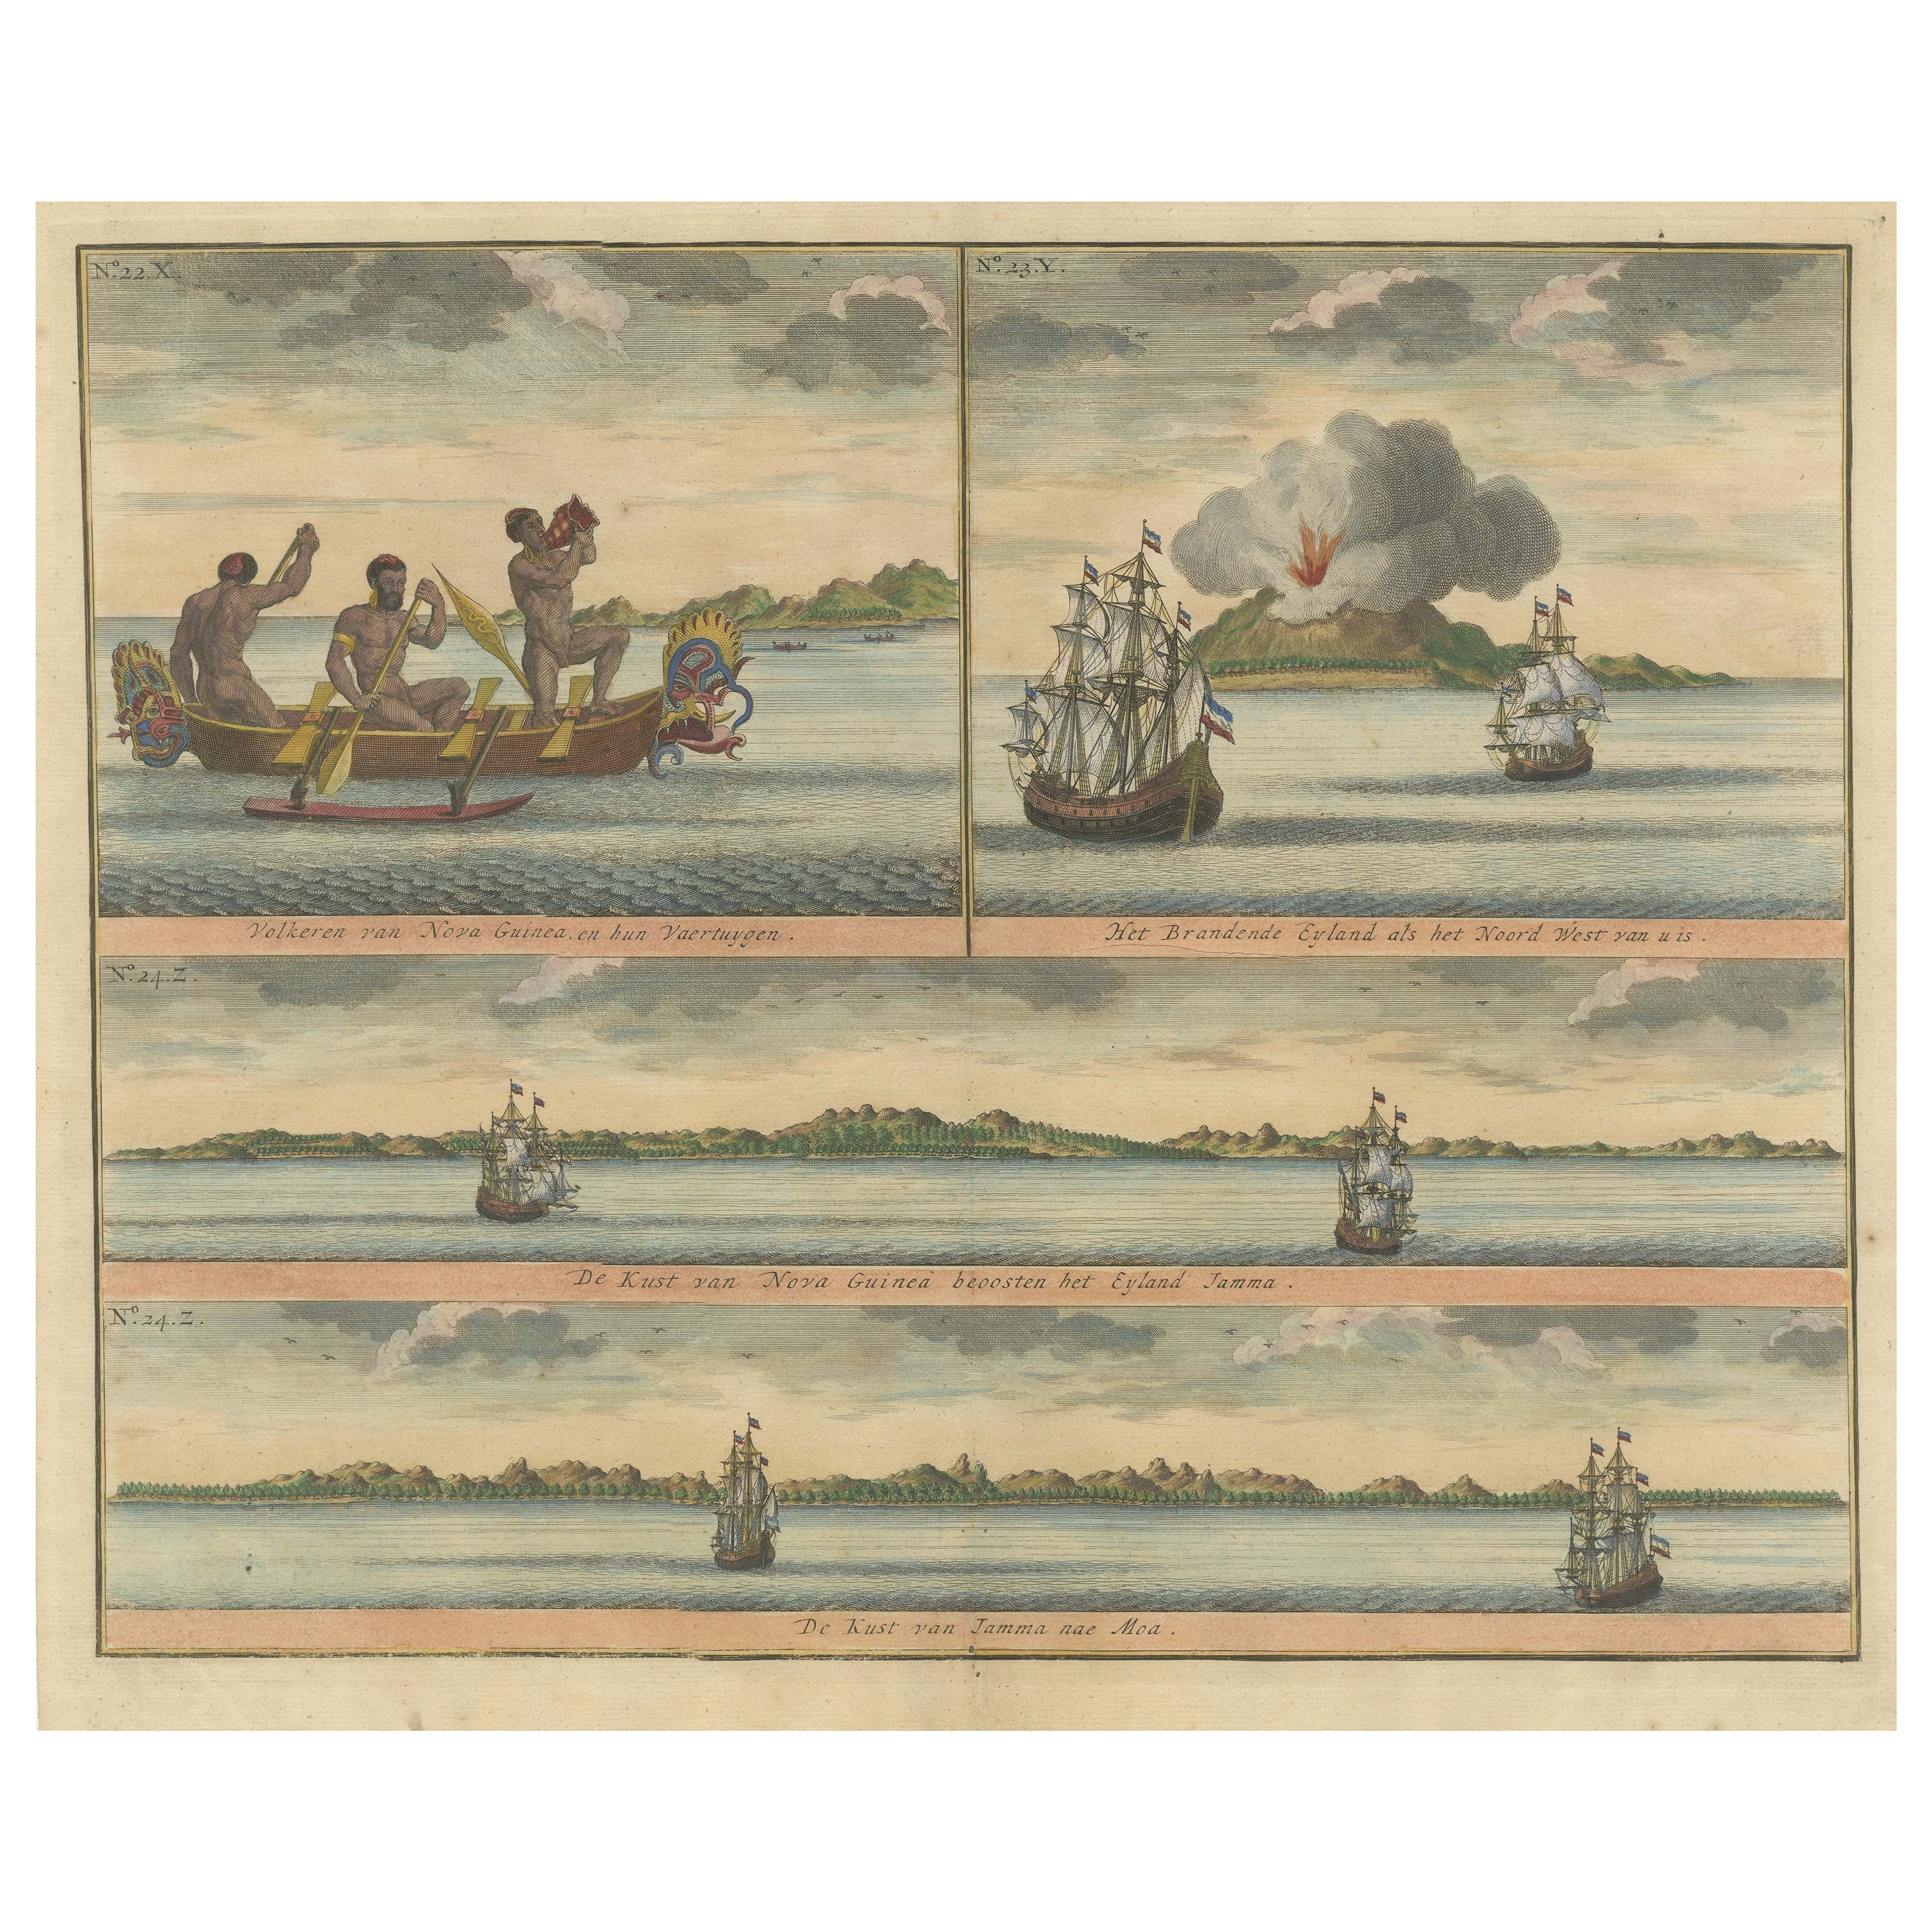 Colored Antique Print of New Guinea Fishermen and views of New Guinea